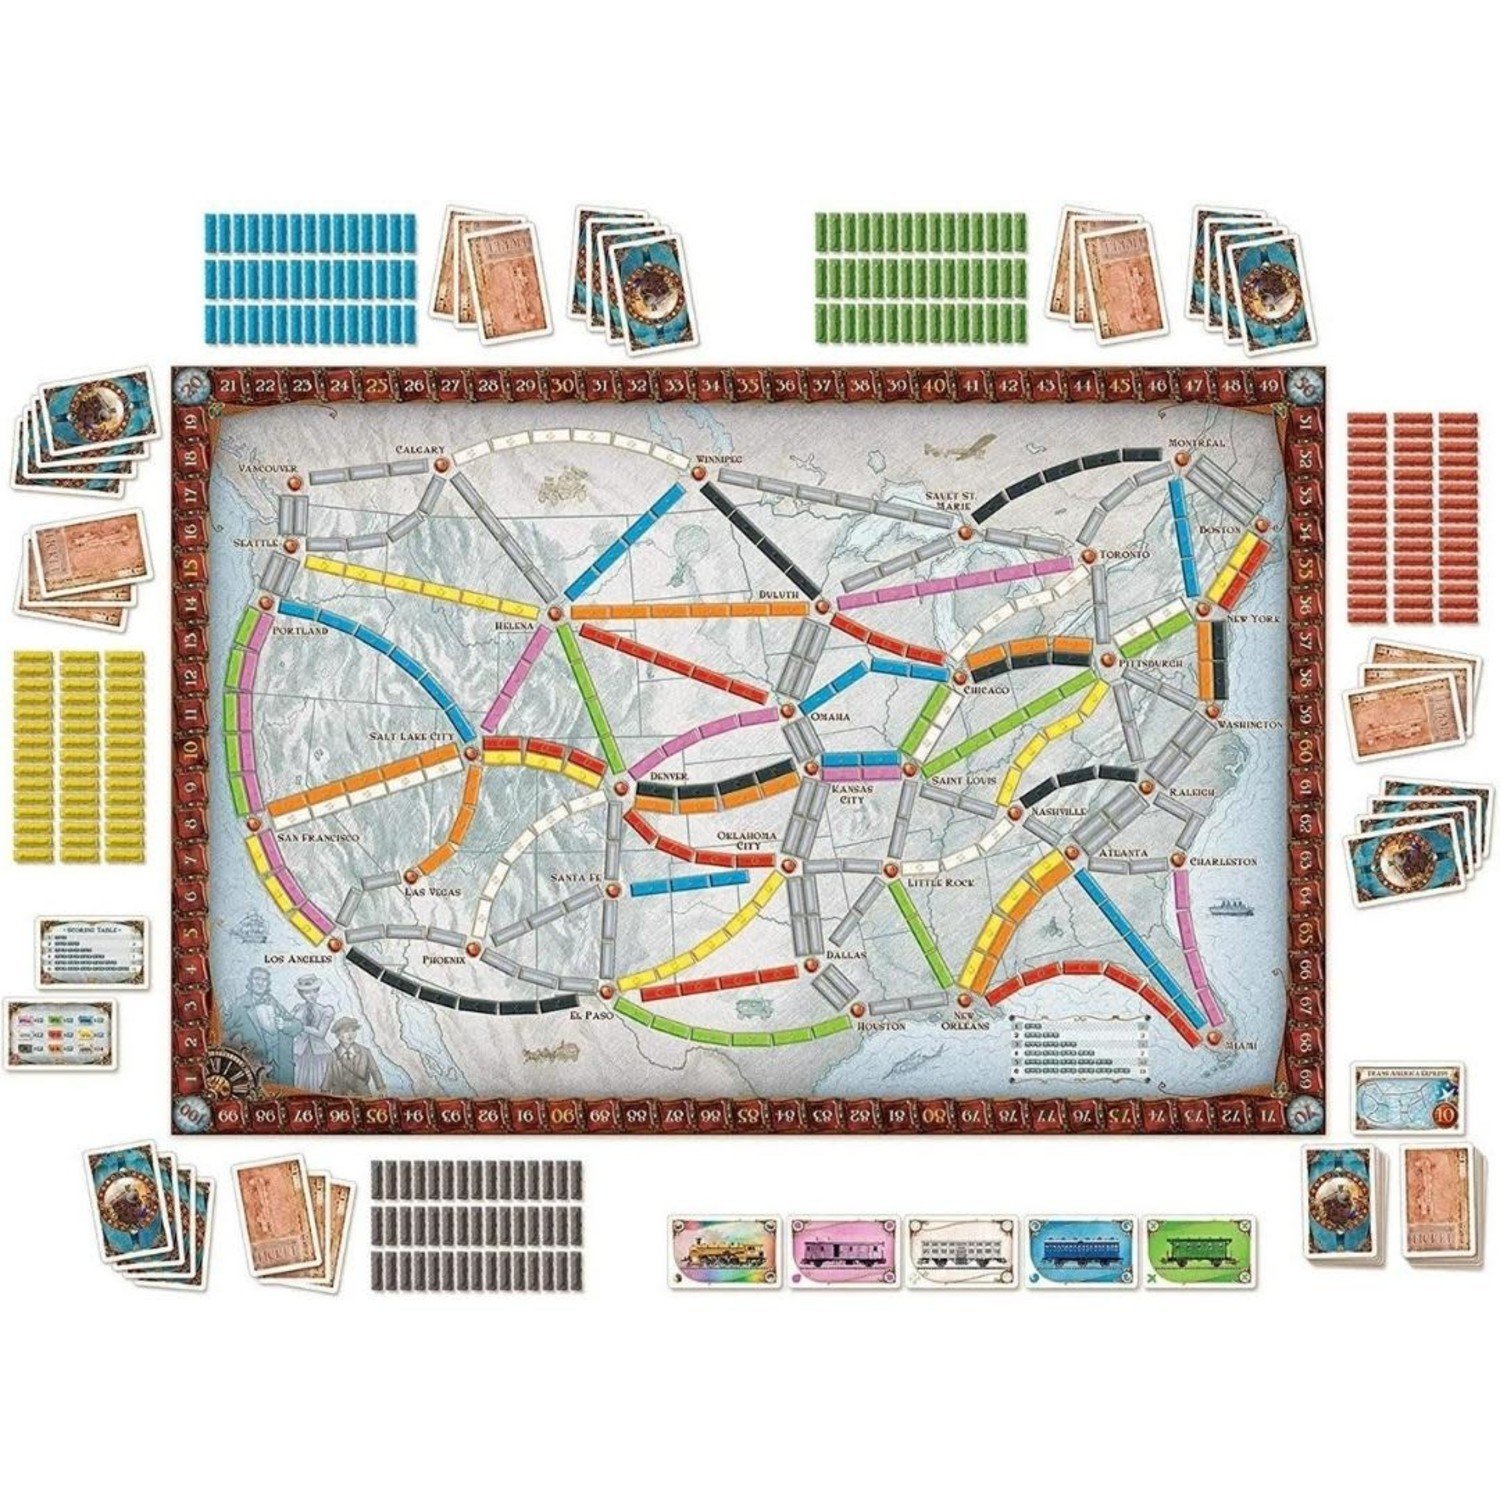 Ticket to Ride, Board Game